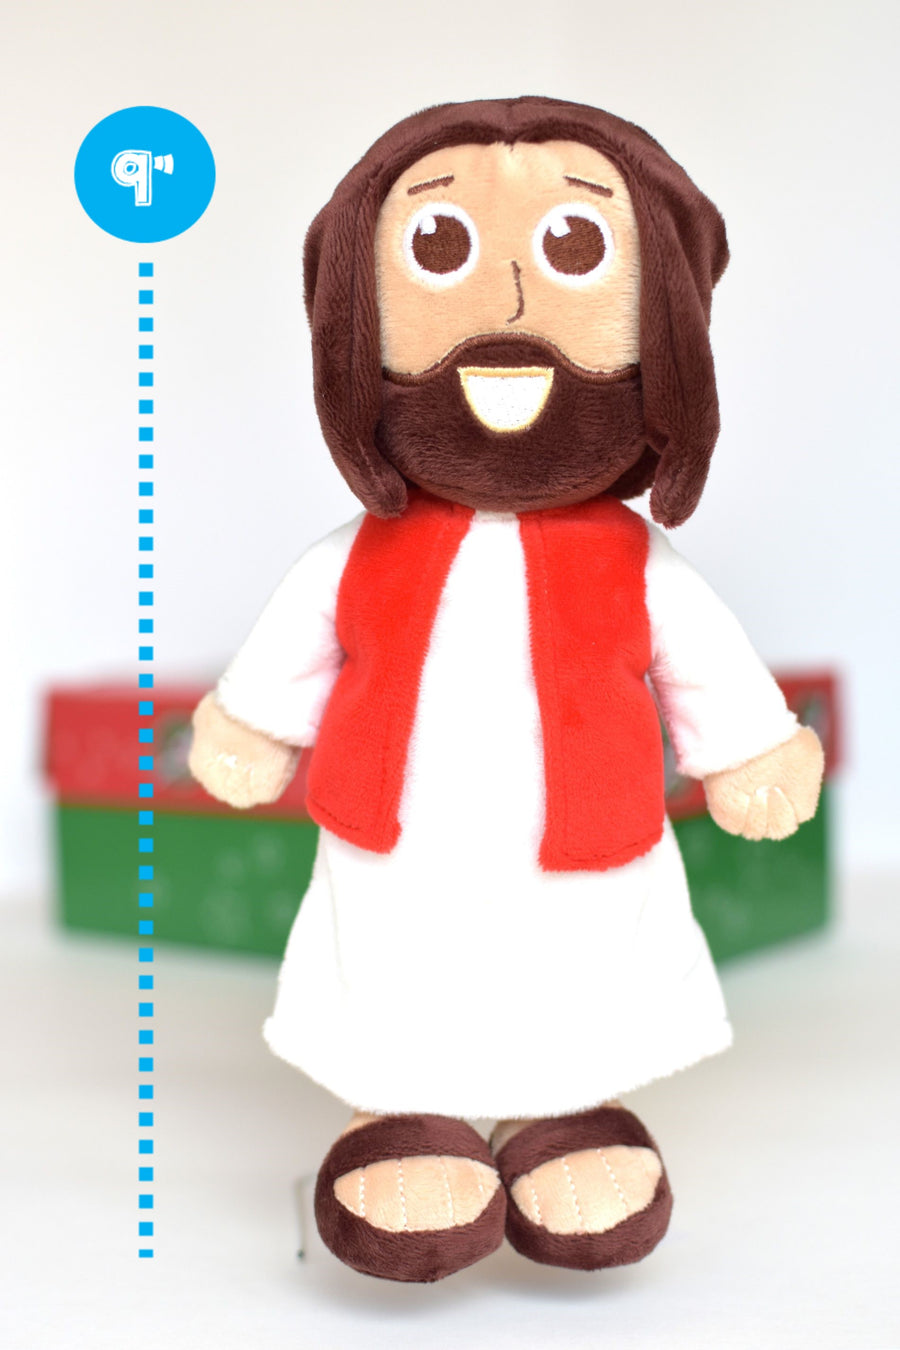 Shoebox Jesus Doll.  Perfect gift idea for Operation Christmas Child.  Great WOW gift idea for boys and girls of all ages and languages.